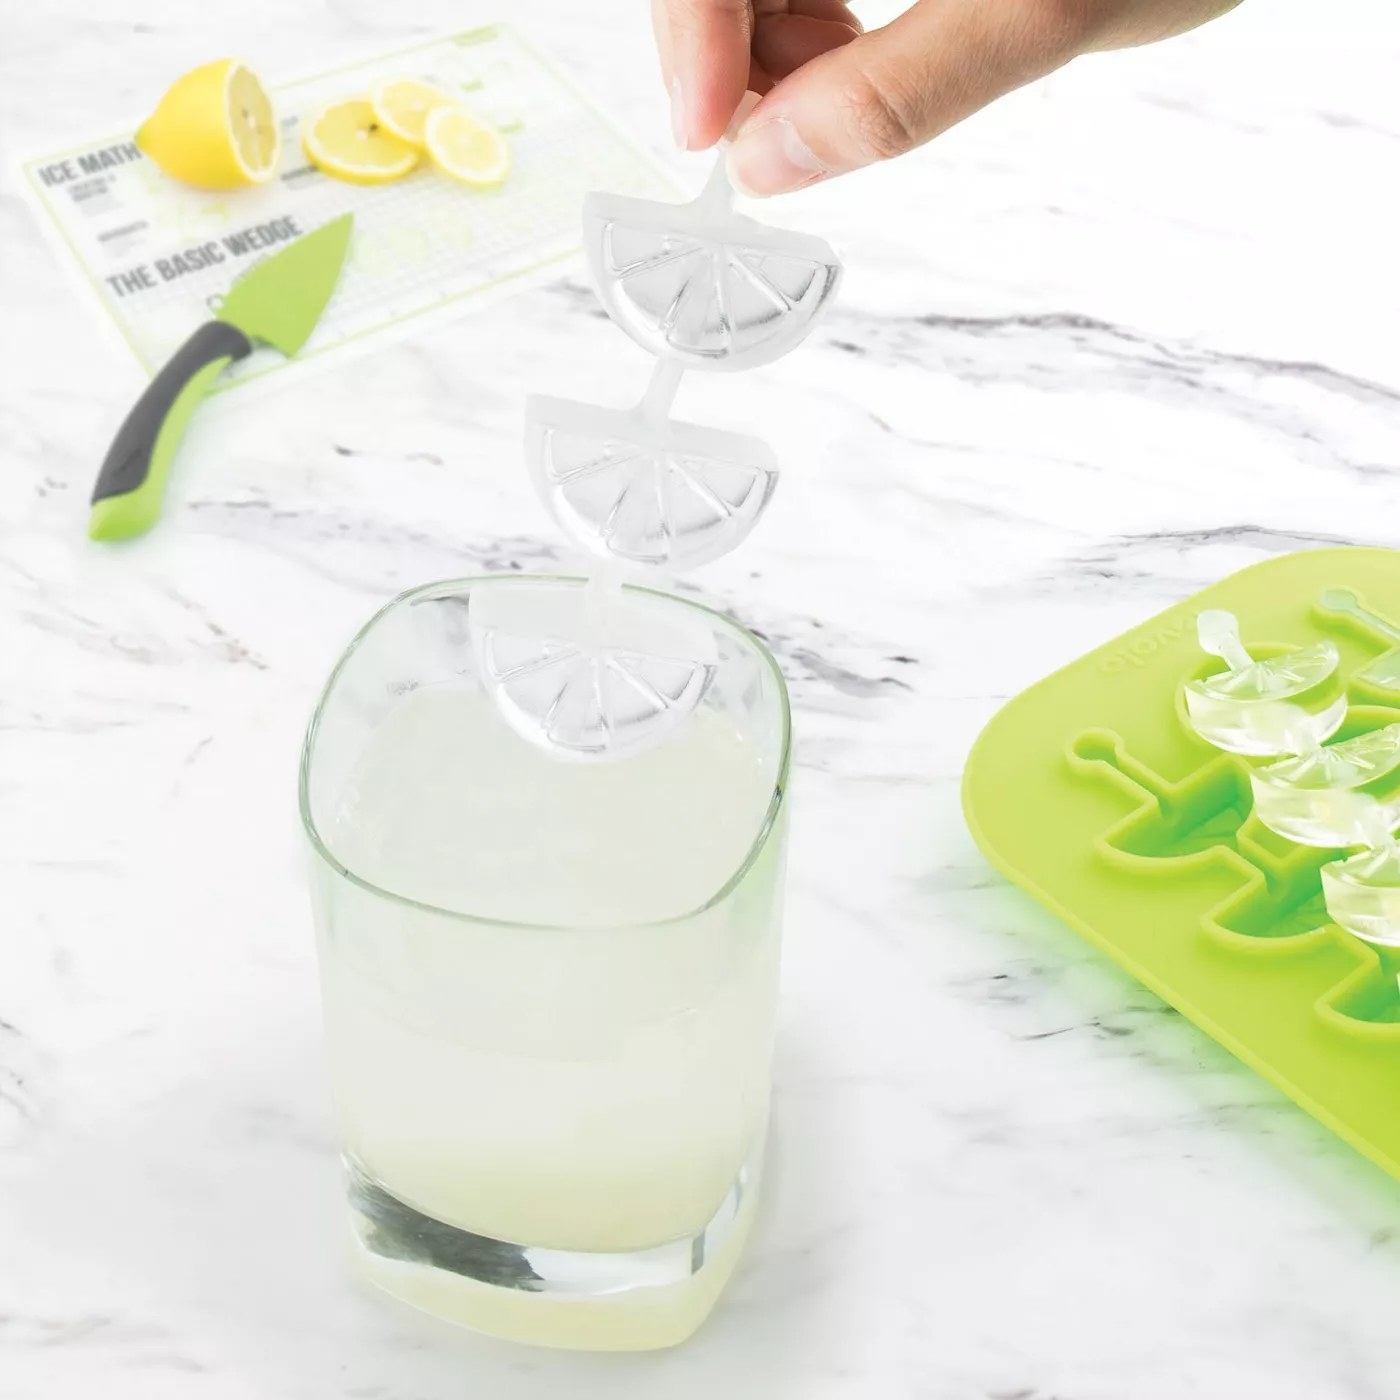 The three-tiered citrus ice cube is over a glass of what looks like lemonade